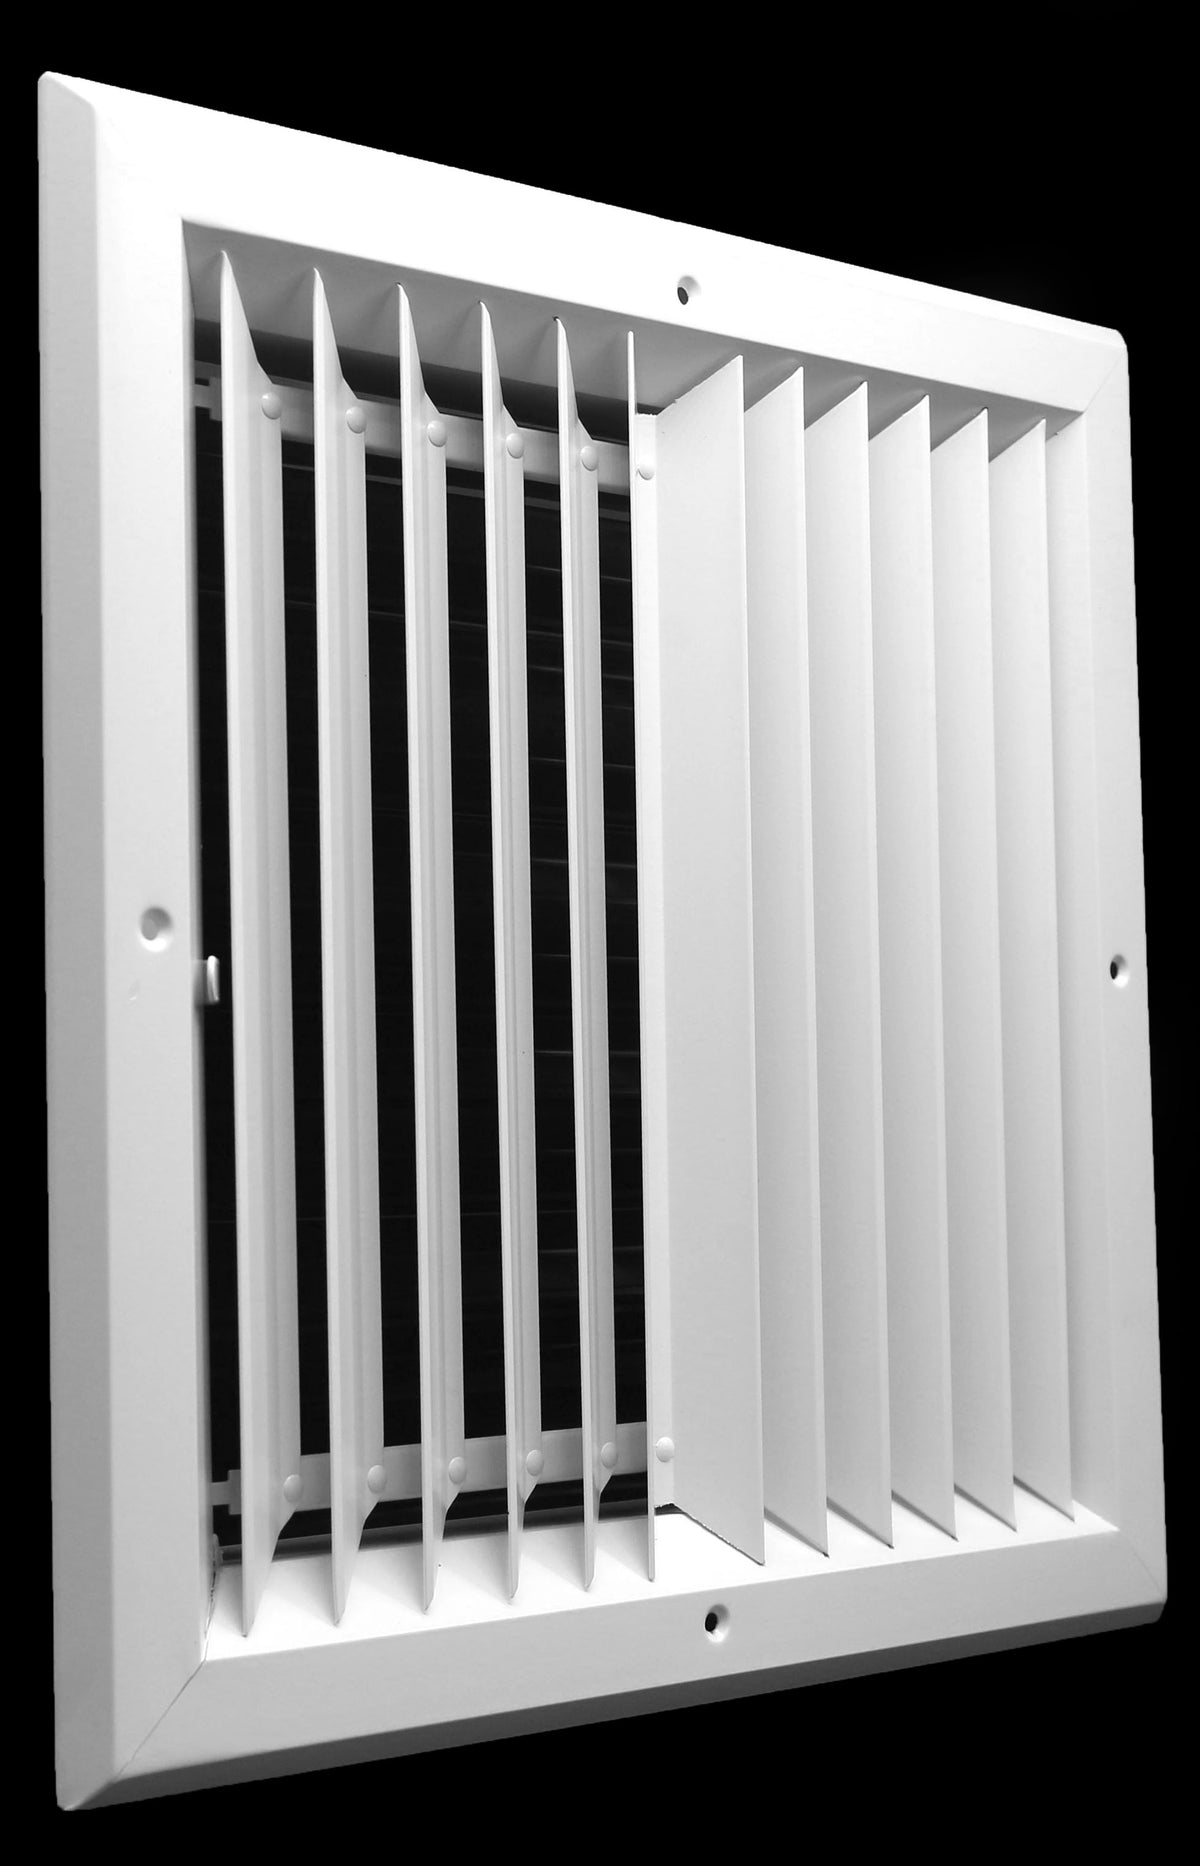 10&quot; x 10&quot; 2-WAY ALUMINUM BAR CEILING DIFFUSER - Vent Duct Cover - With Opposing Dampers via Lever Control